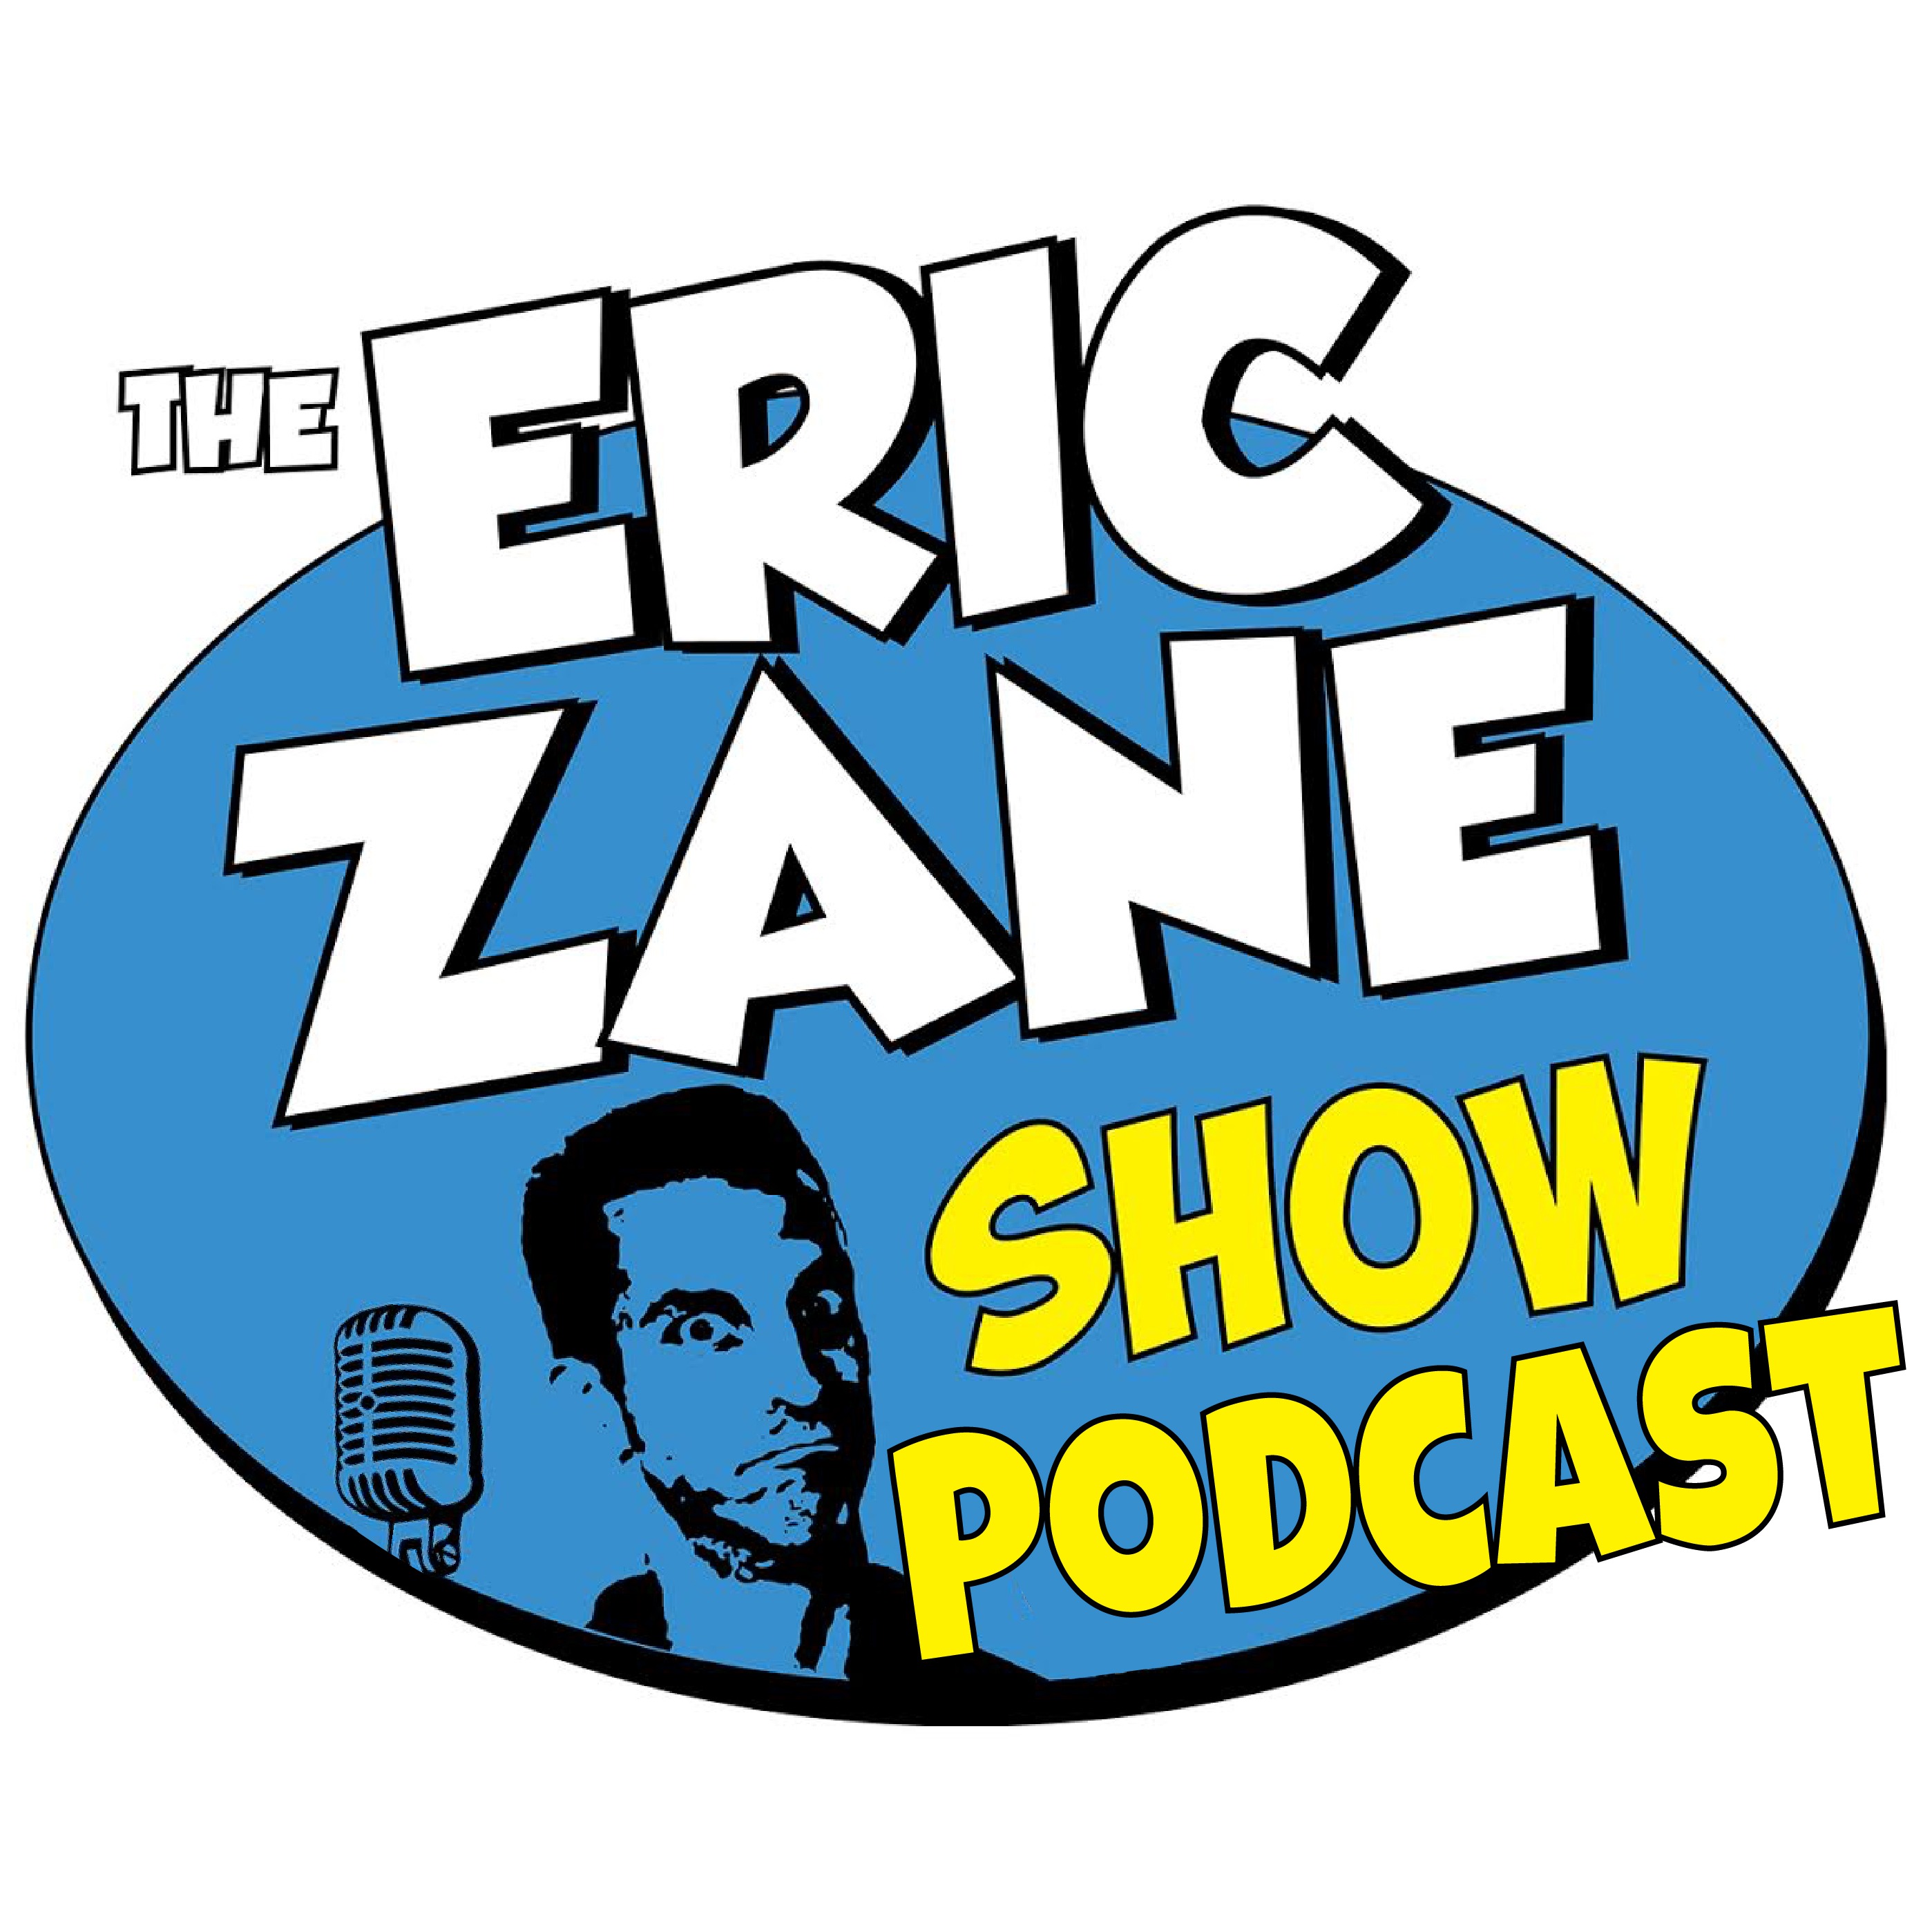 Eric Zane Show Podcast 859 That's an expensive steak.